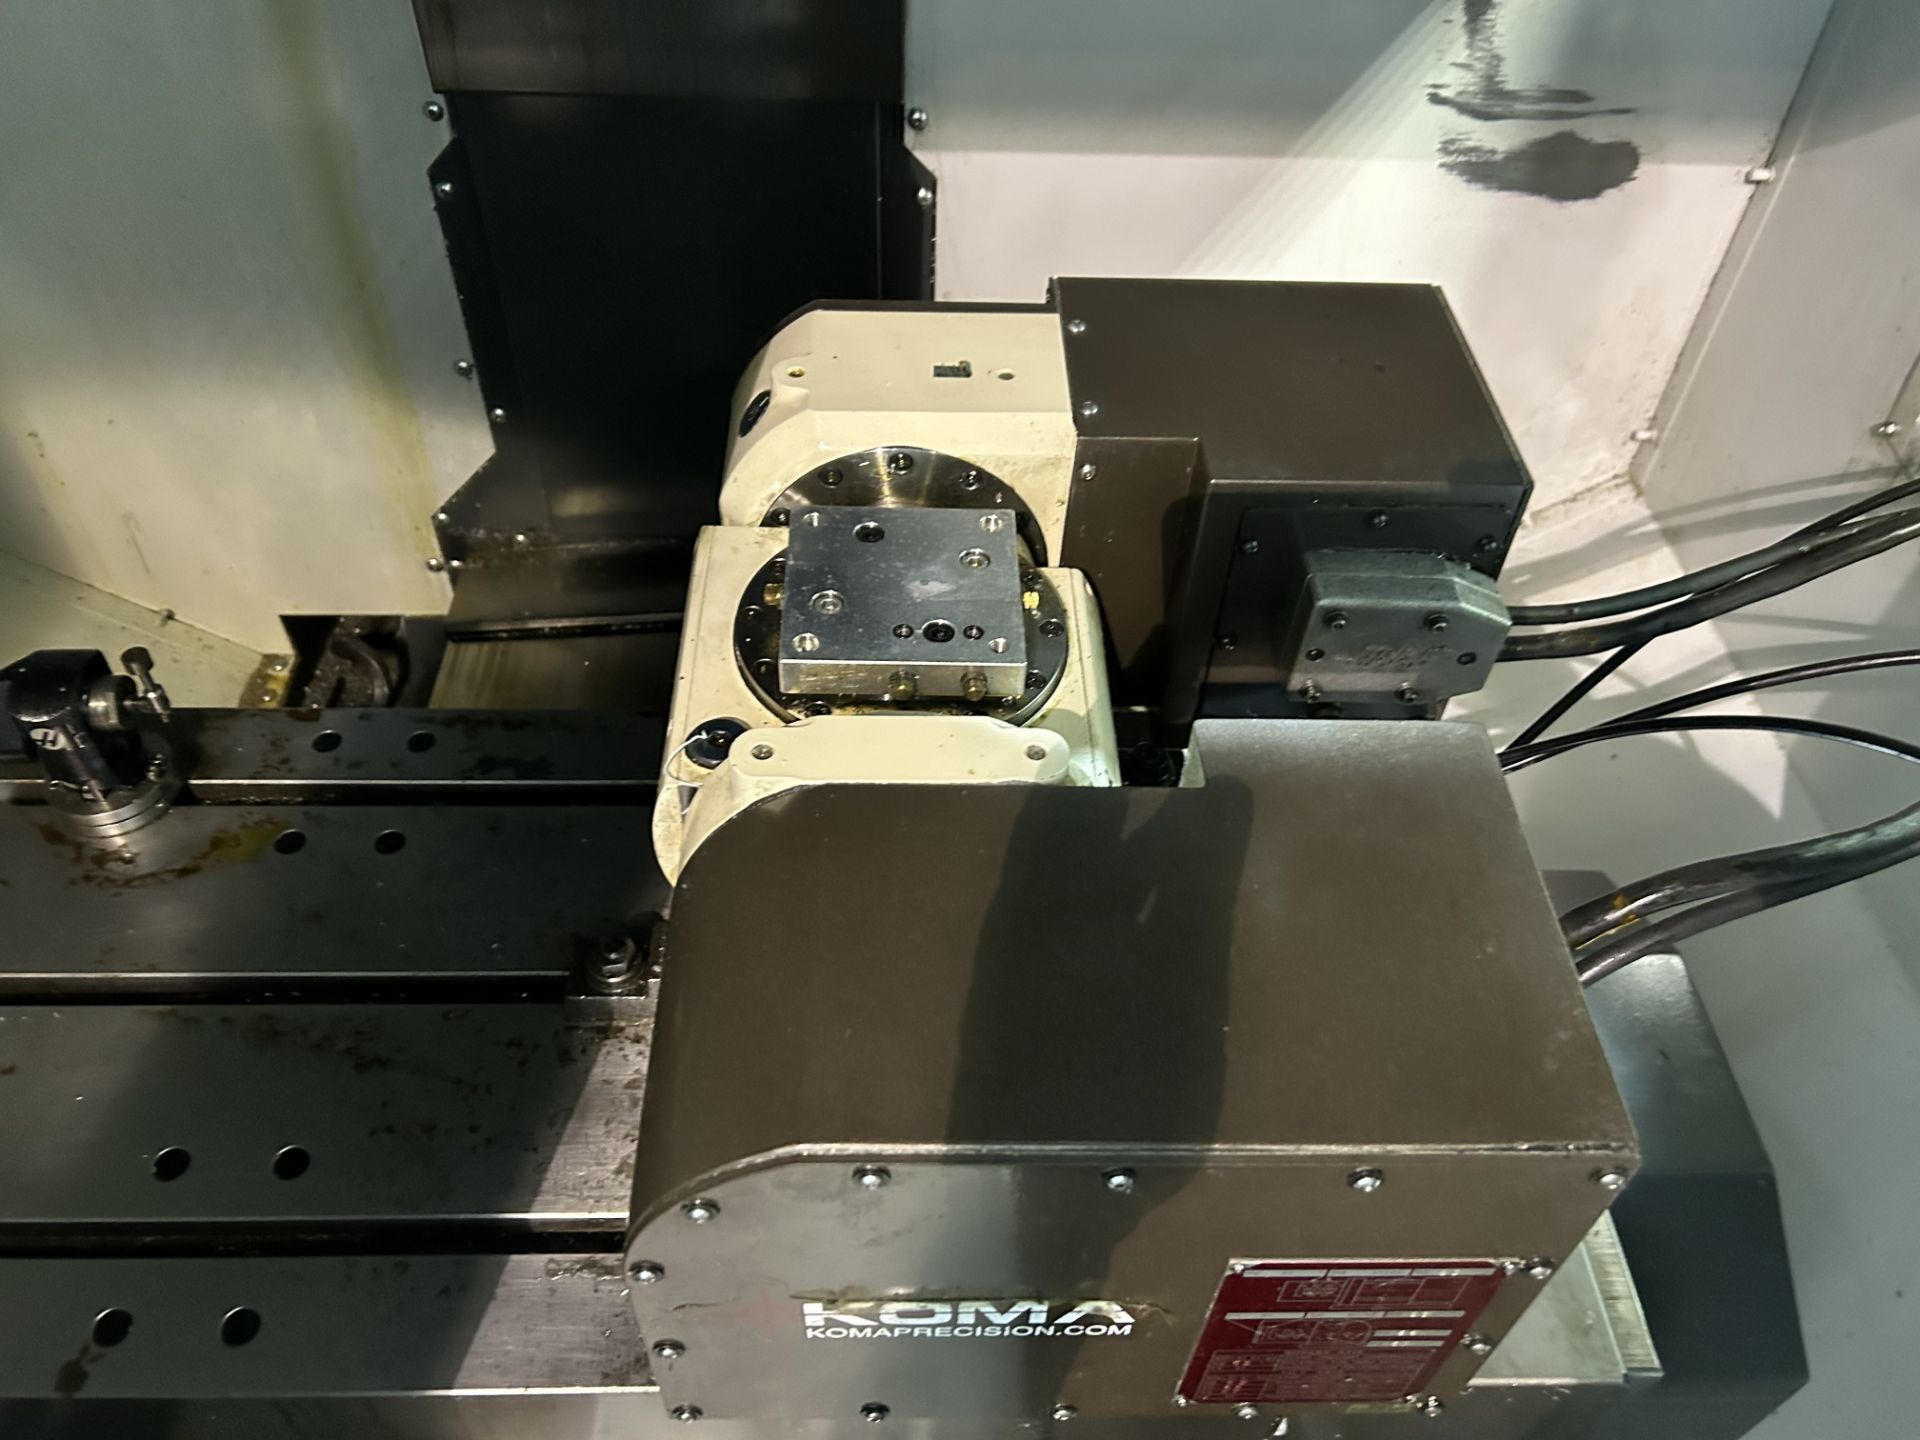 Haas DT-1 5-Axis CNC Drilling & Tapping Machine, S/N 1123539, 2015 - Image 4 of 7